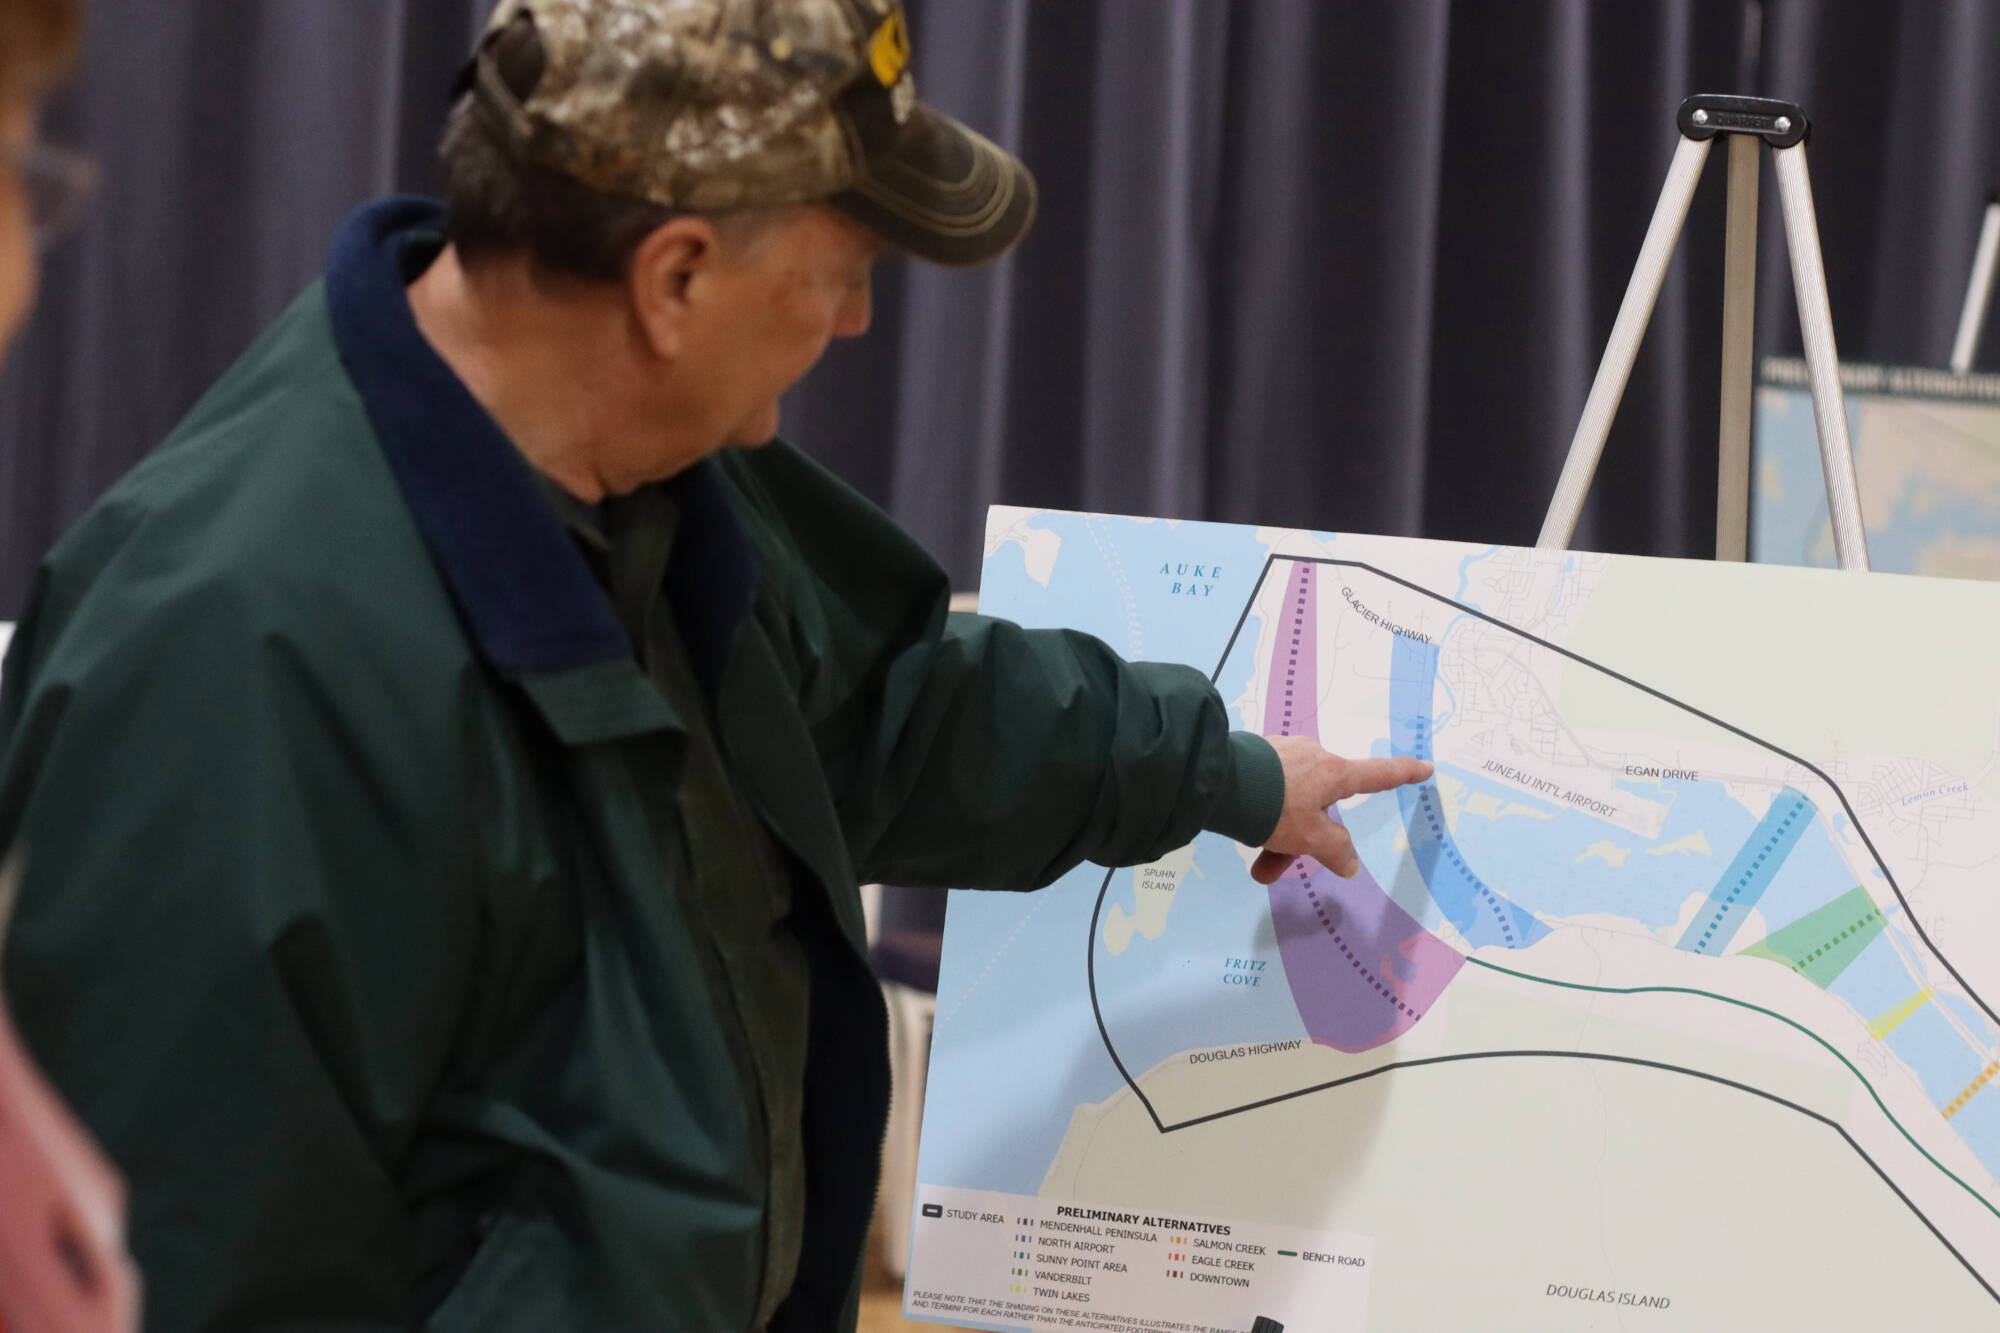 Juneau resident Denny DeWitt looks at the options for a second Douglas crossing during an open house as part of the evaluation process in early December at the Juneau Arts Humanities Council building. (Mark Sabbatini / Juneau Empire)